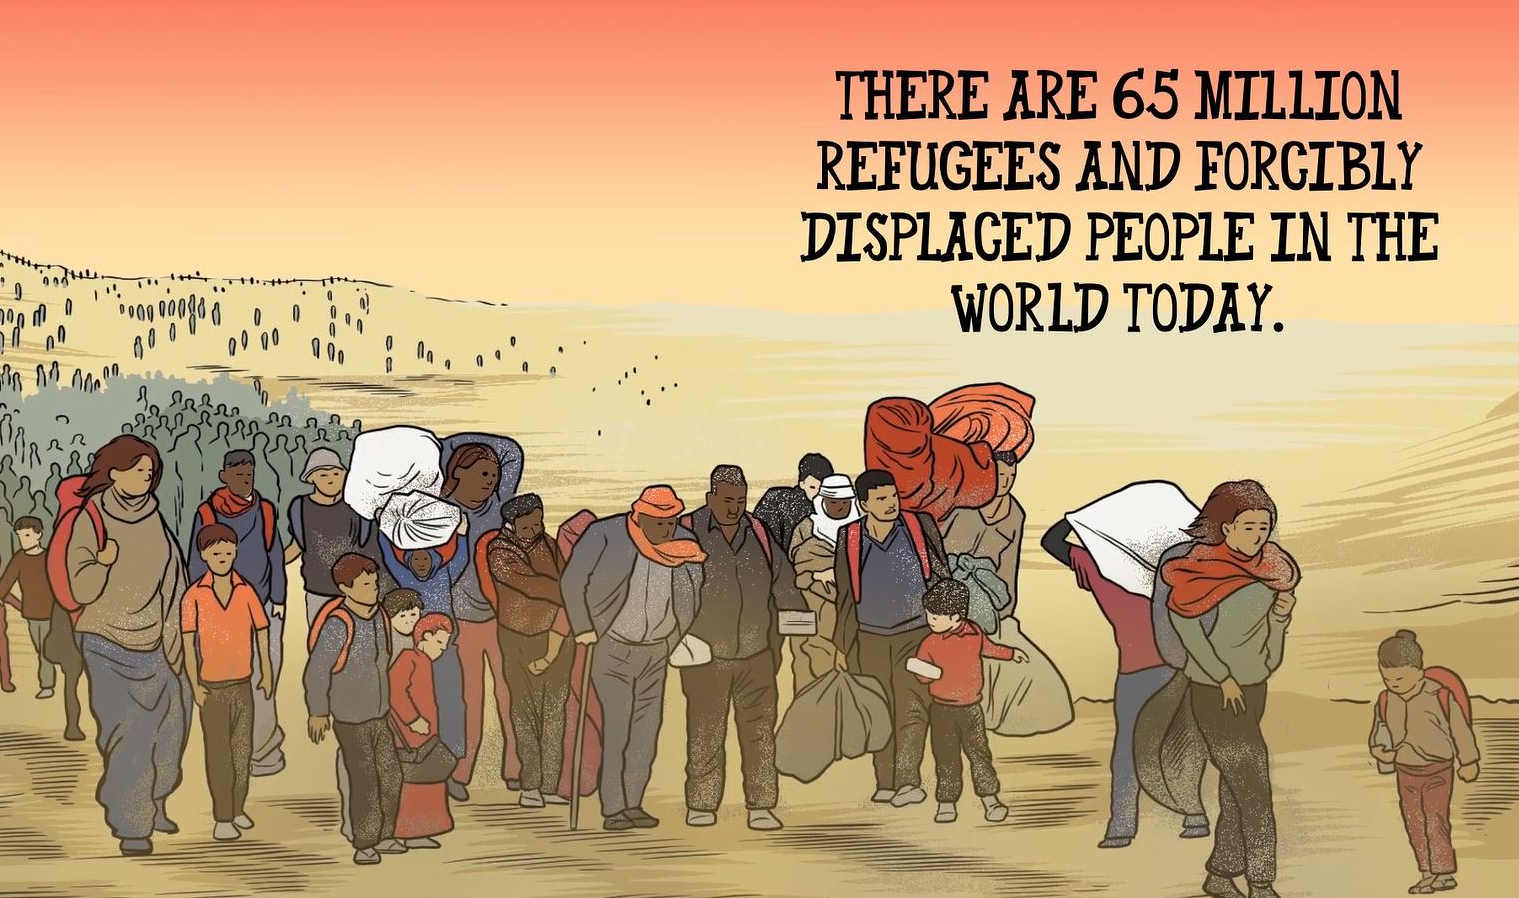 Image from “The Migrant,” an animated video produced by United Methodist Communications, created by Chocolate Moose Media.